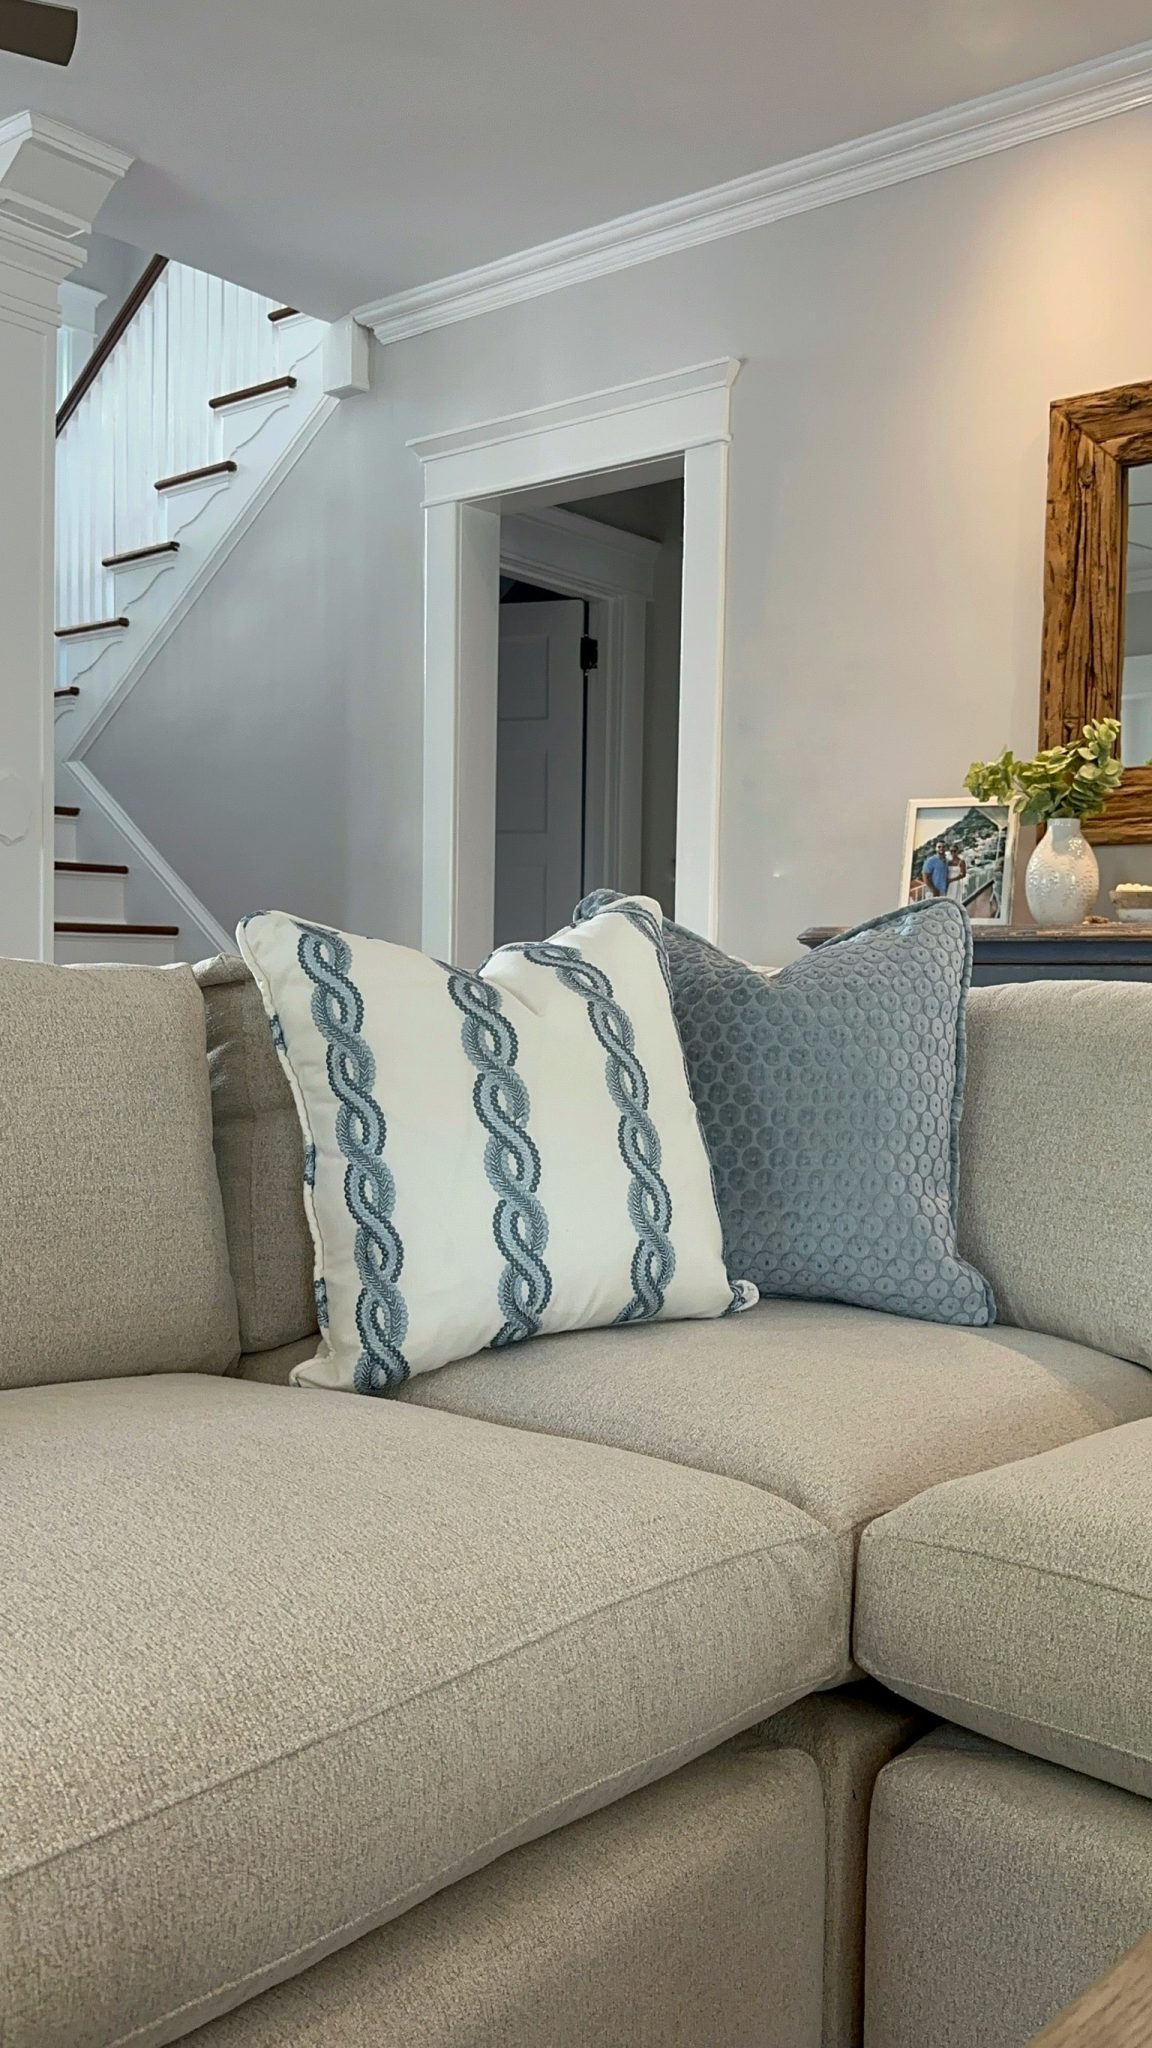 A sectional couch in a stylish living room with stairs, featuring a sophisticated interior design.